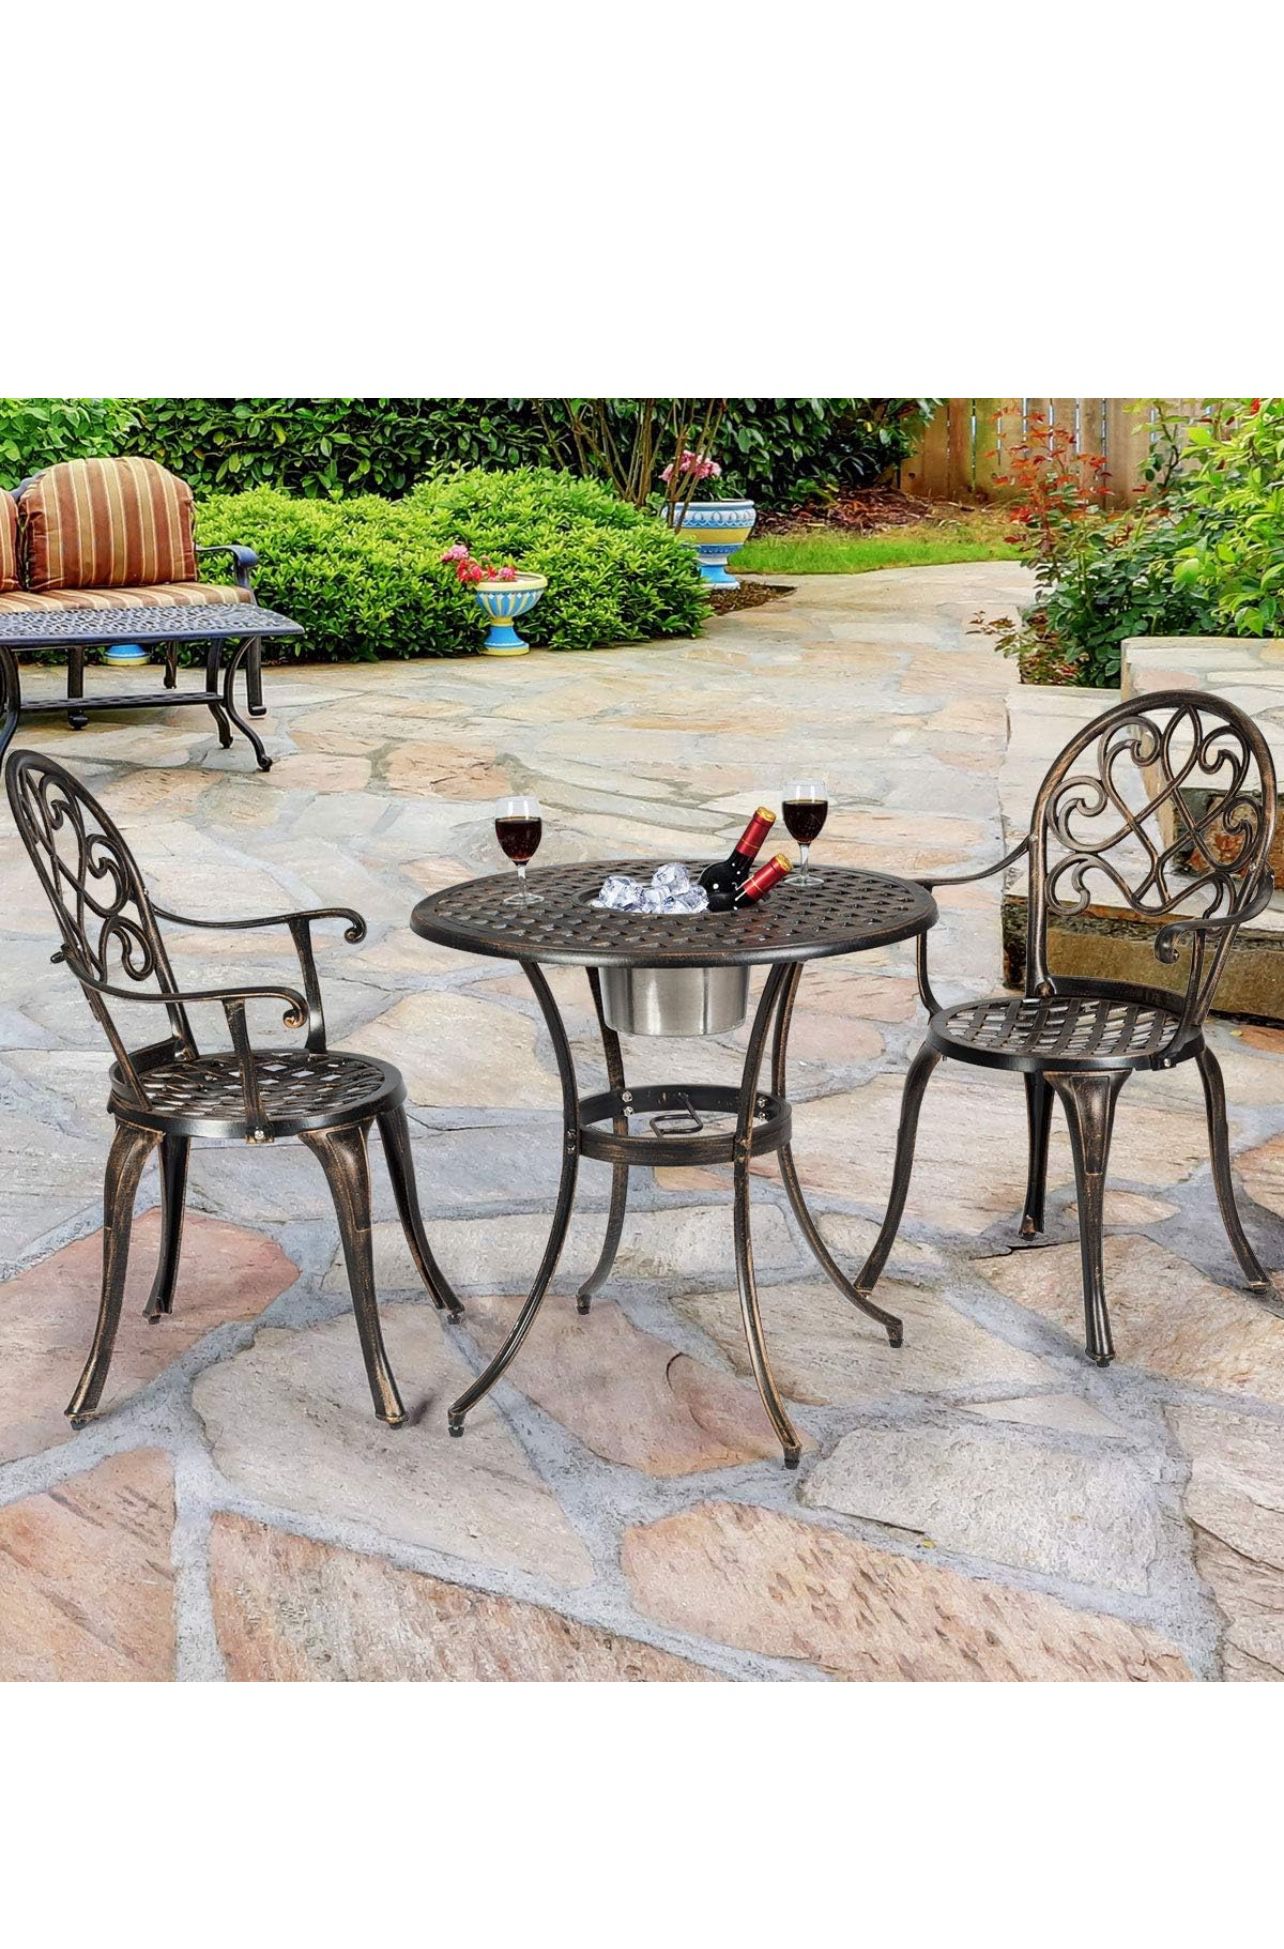 3pcs Bistro Table Set Cast Aluminum Outdoor Patio Furniture Set Round Table W/Removable Ice Bucket, 2 Chairs Antique Garden Furniture Weather Resistan